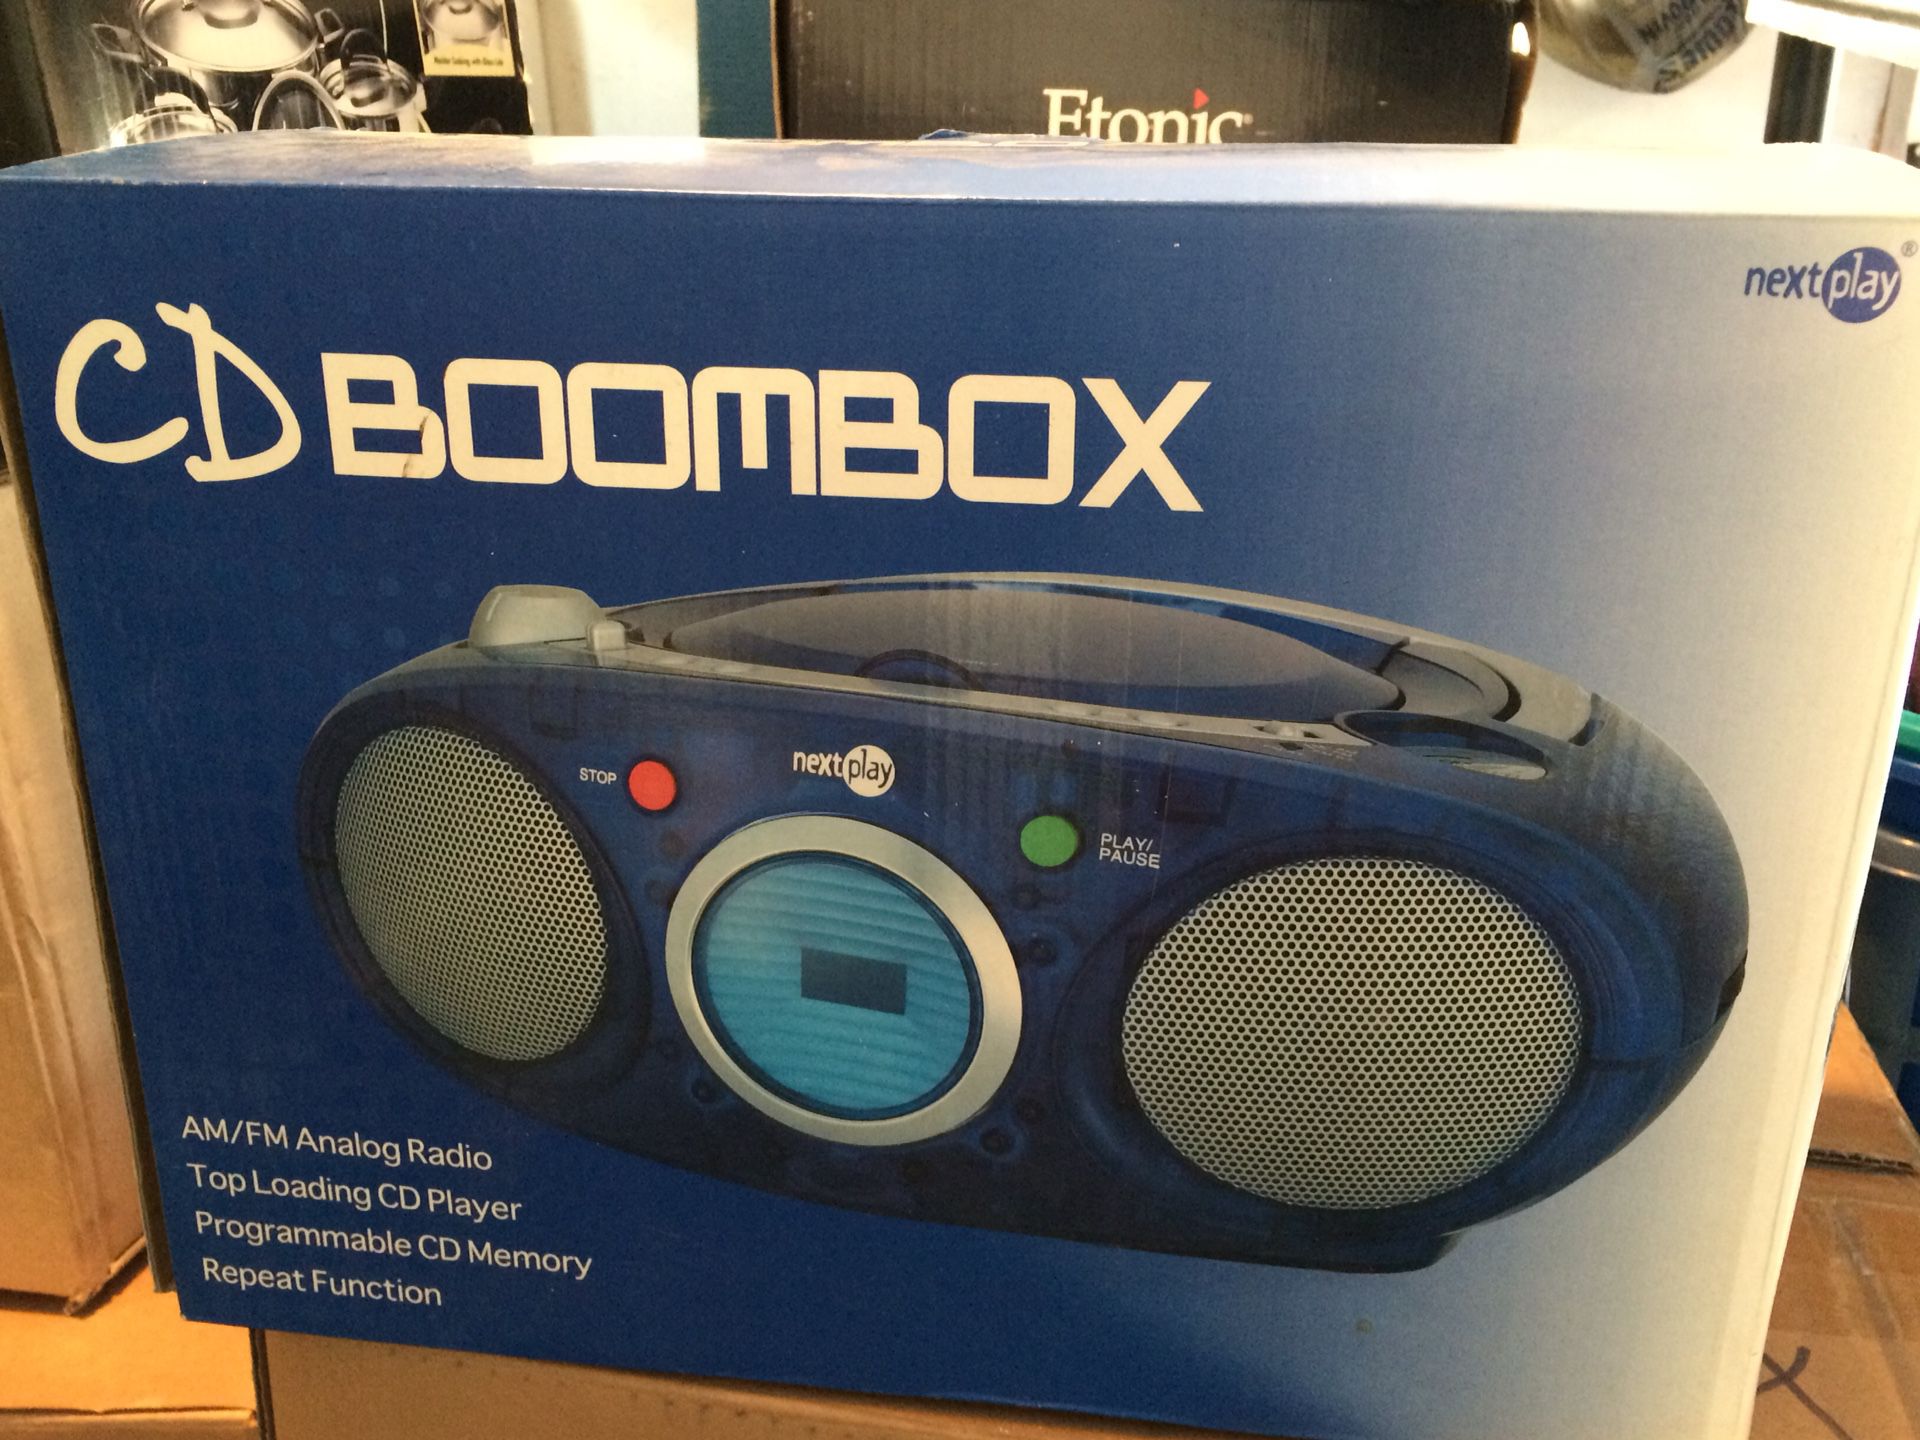 Personal CD boombox